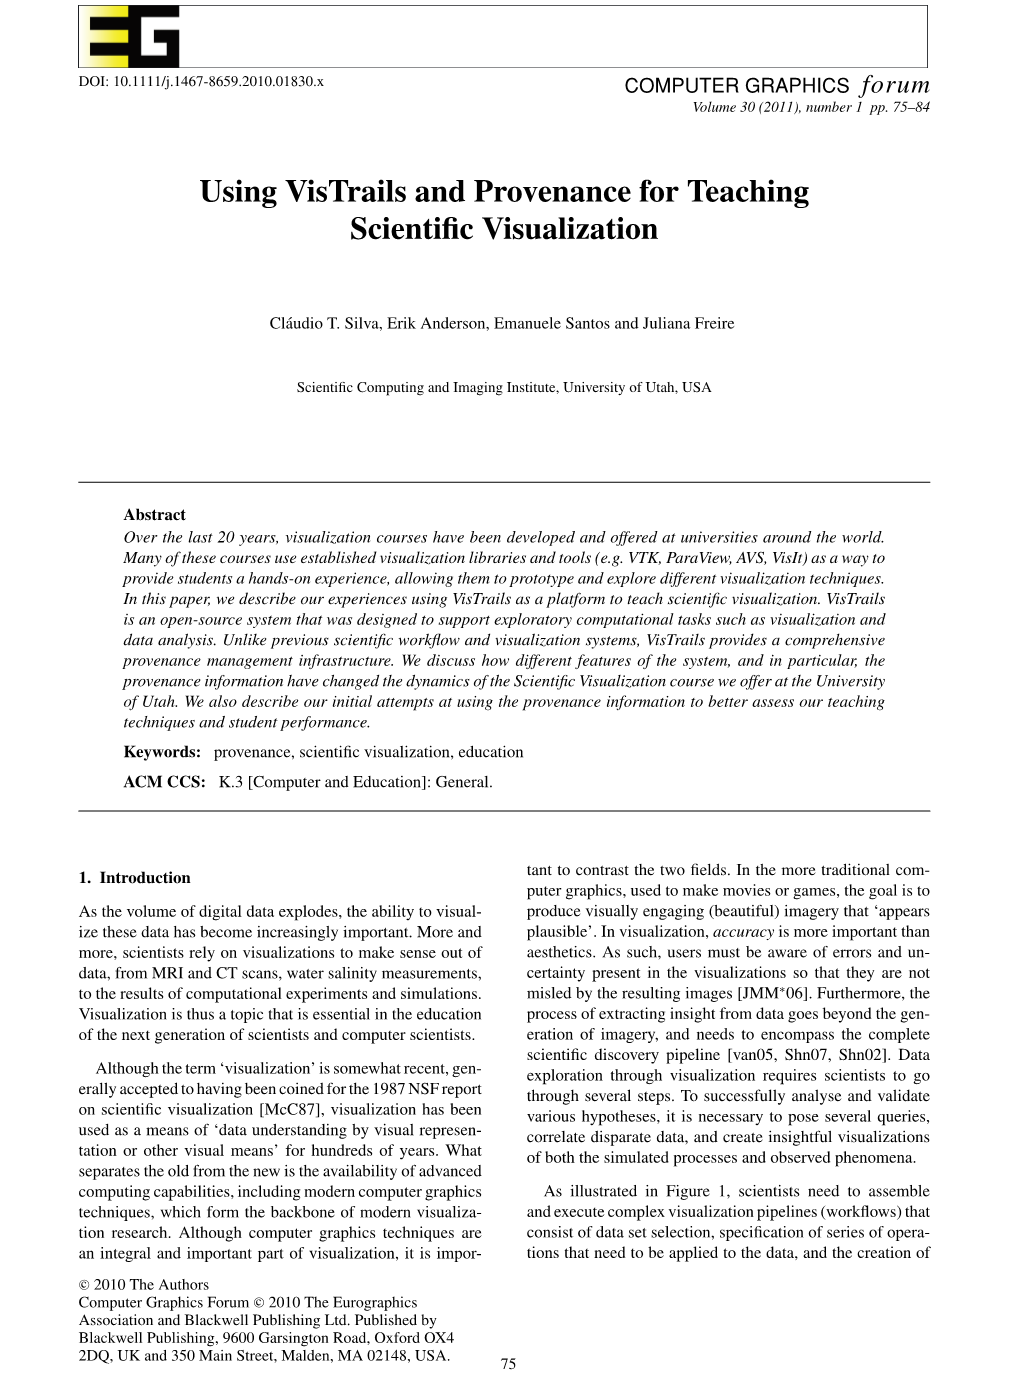 Using Vistrails and Provenance for Teaching Scientific Visualization